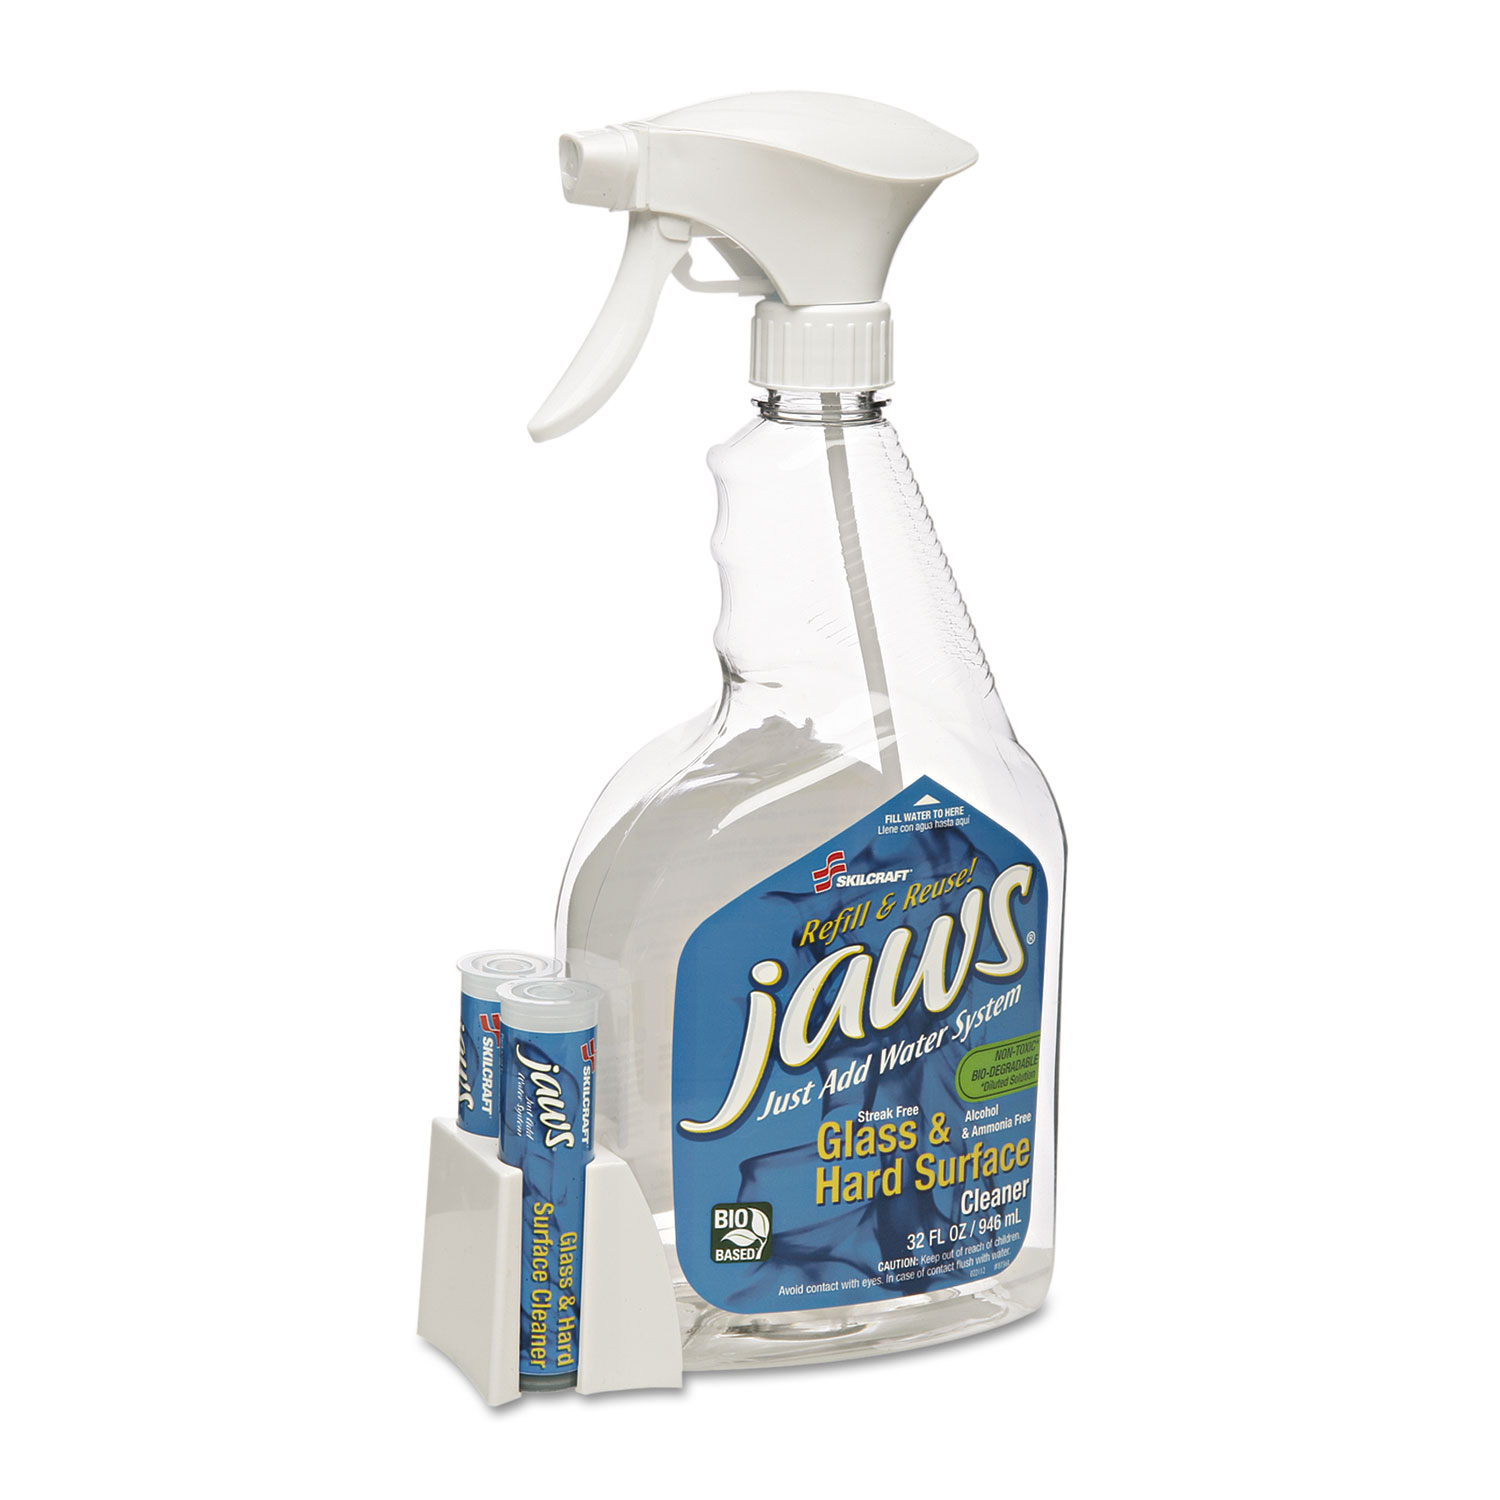 JAWS (Just Add Water System) Glass Cleaner Refill 2 Pack